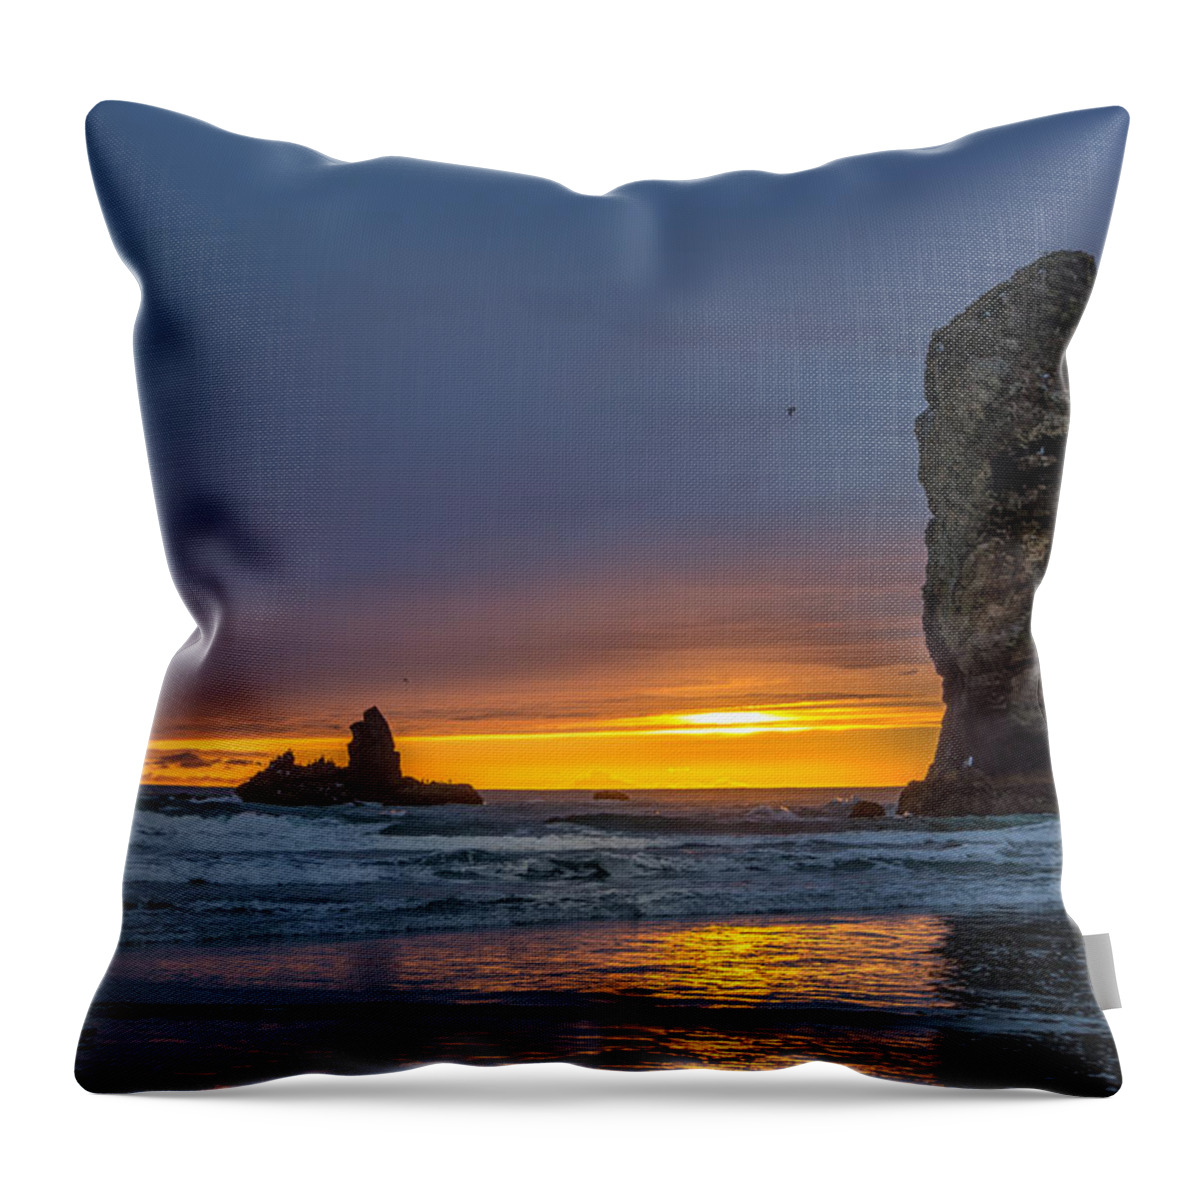 Sunset Throw Pillow featuring the photograph Coastal Sunset by Jerry Cahill